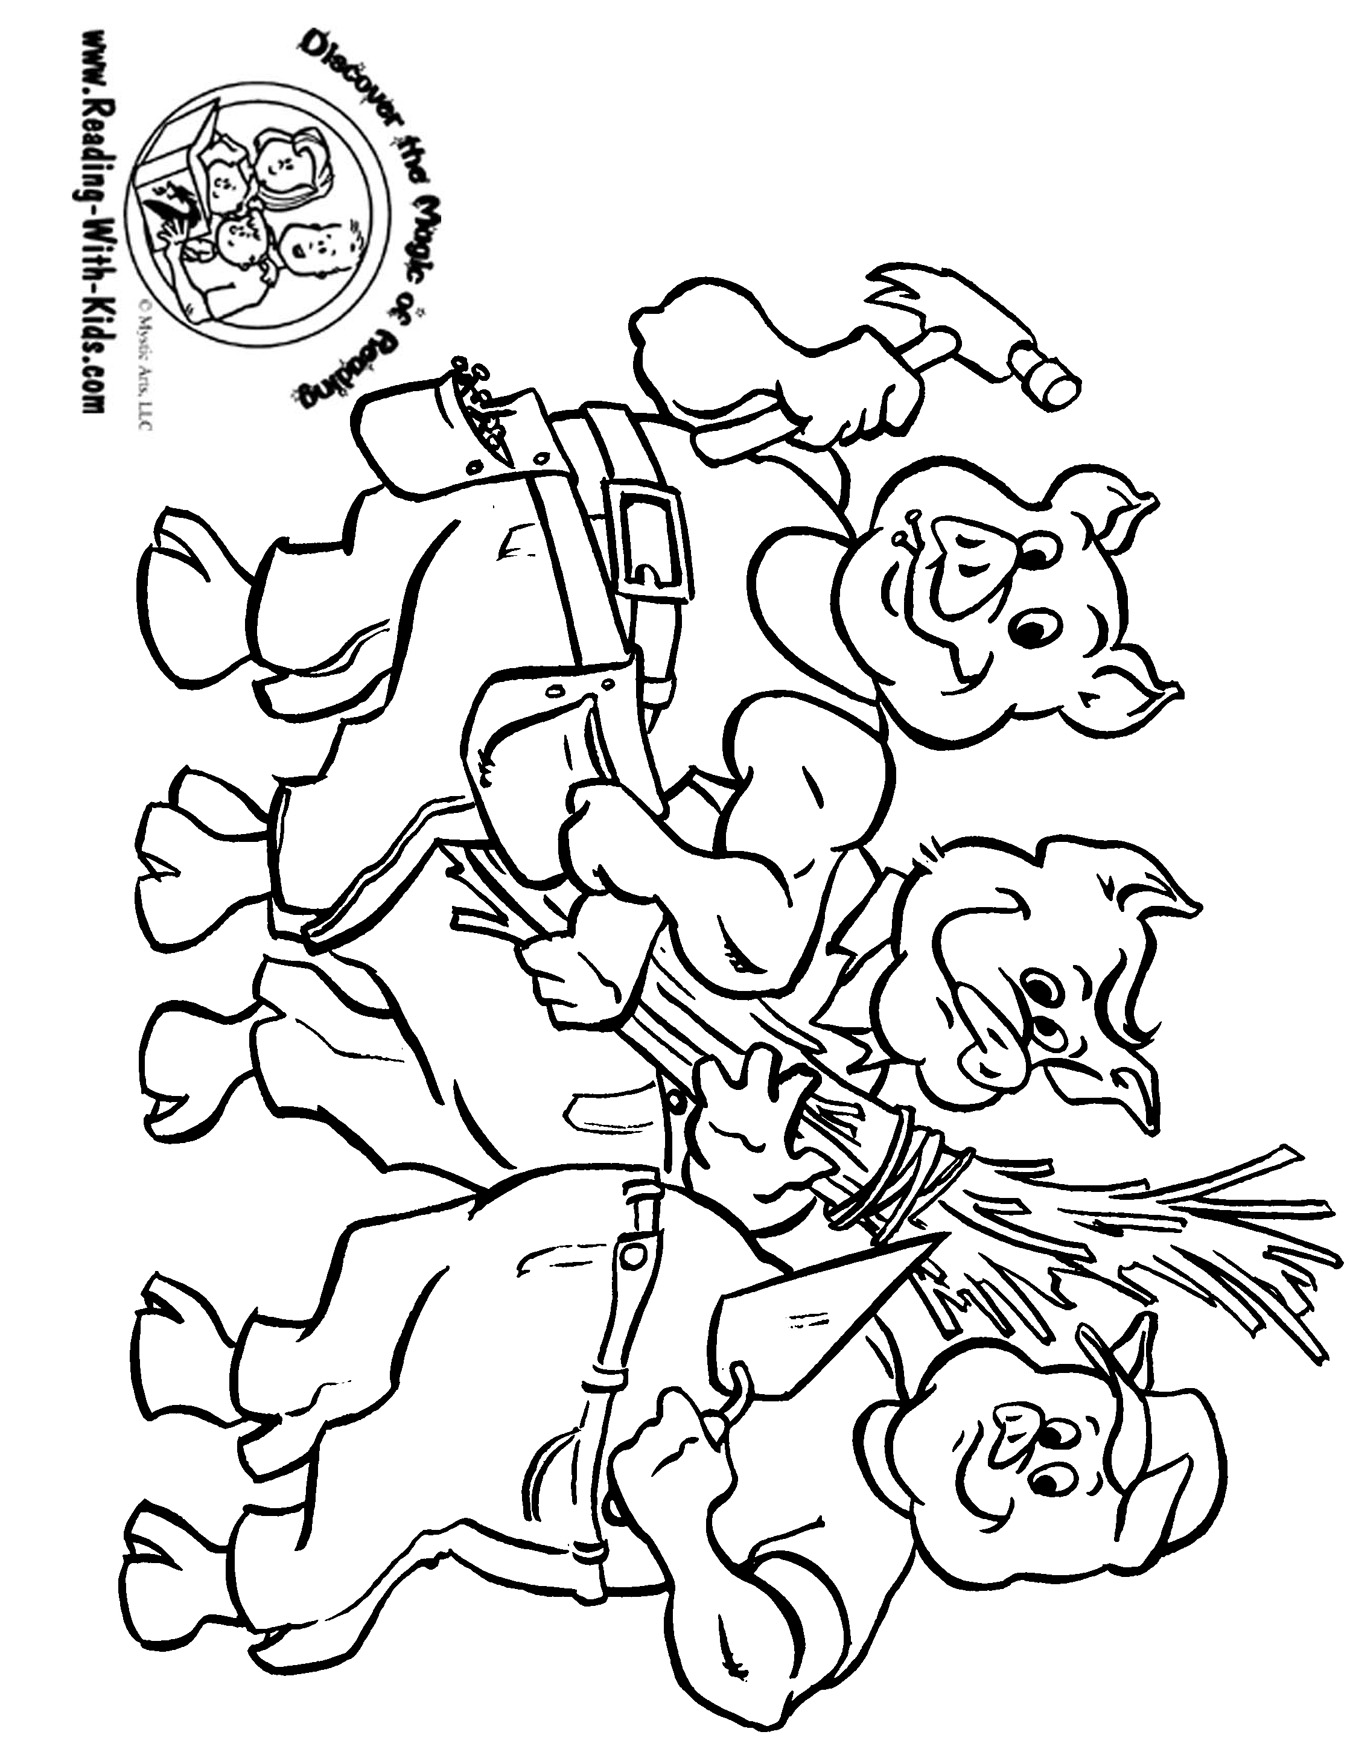 coloring-pages-fairy-tail-at-getcolorings-free-printable-colorings-pages-to-print-and-color